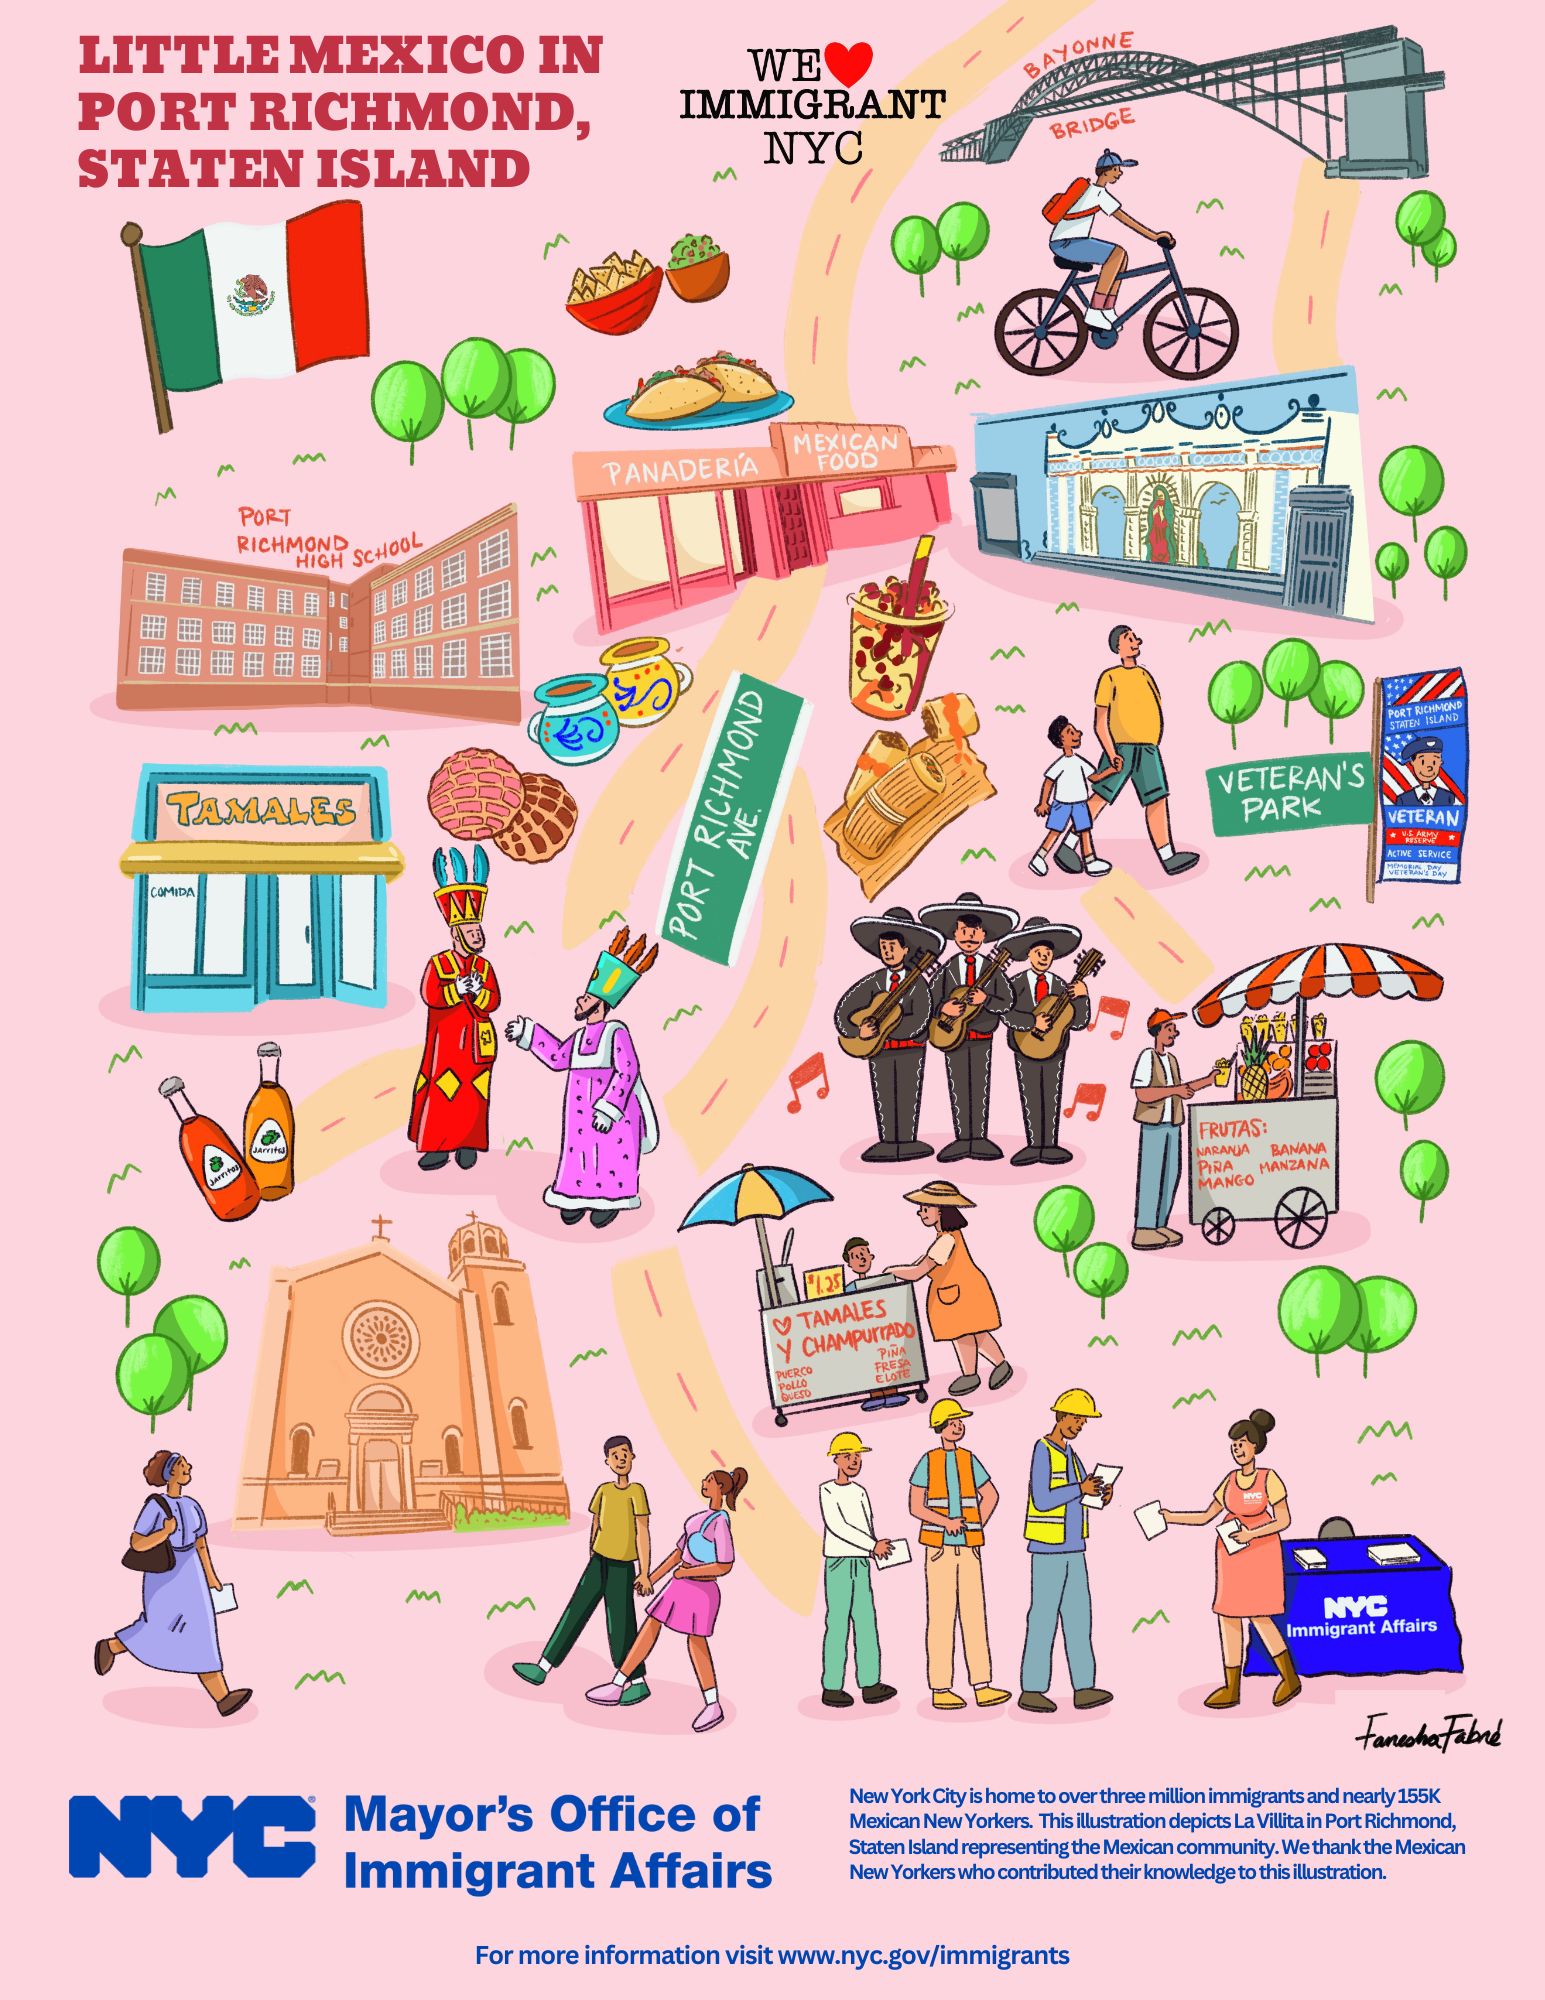 A graphic of Little Mexico in Port Richmond, Staten Island.